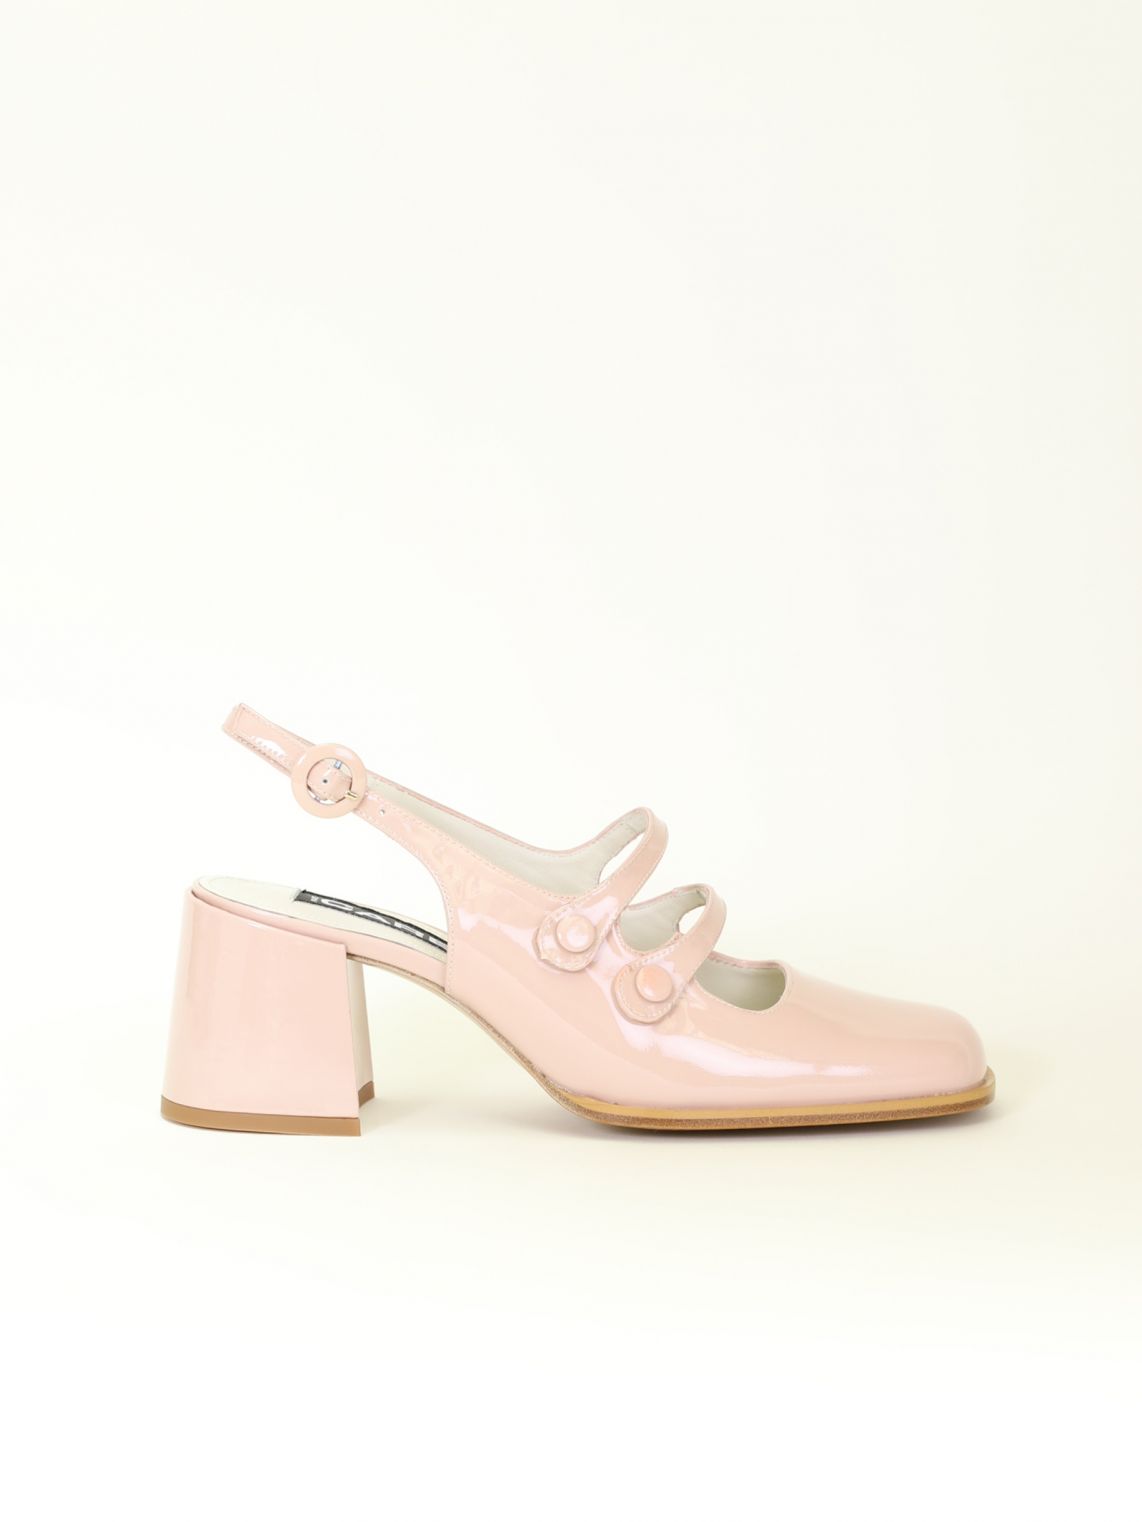 Dirty Rose patent leather Mary Janes